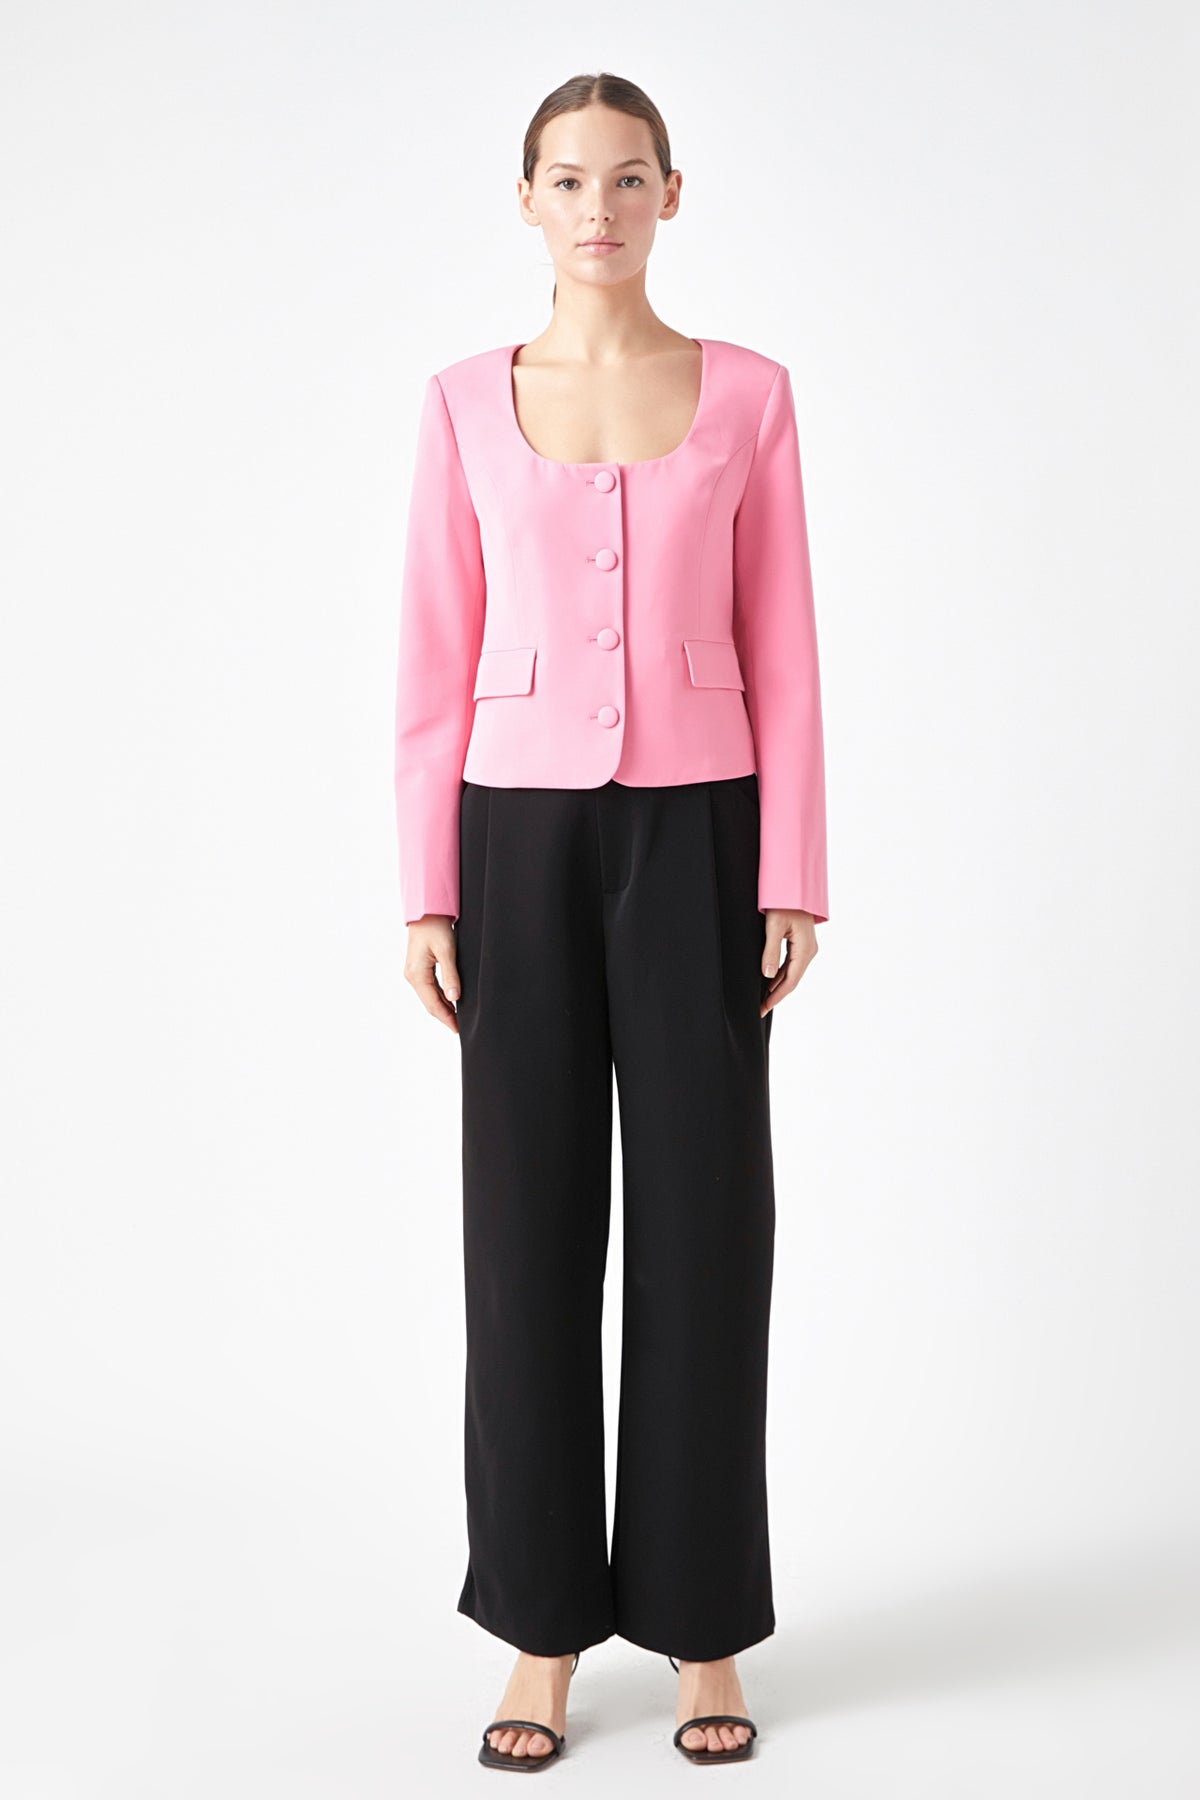 ENDLESS ROSE - Scooped U Buttoned Top - JACKETS available at Objectrare